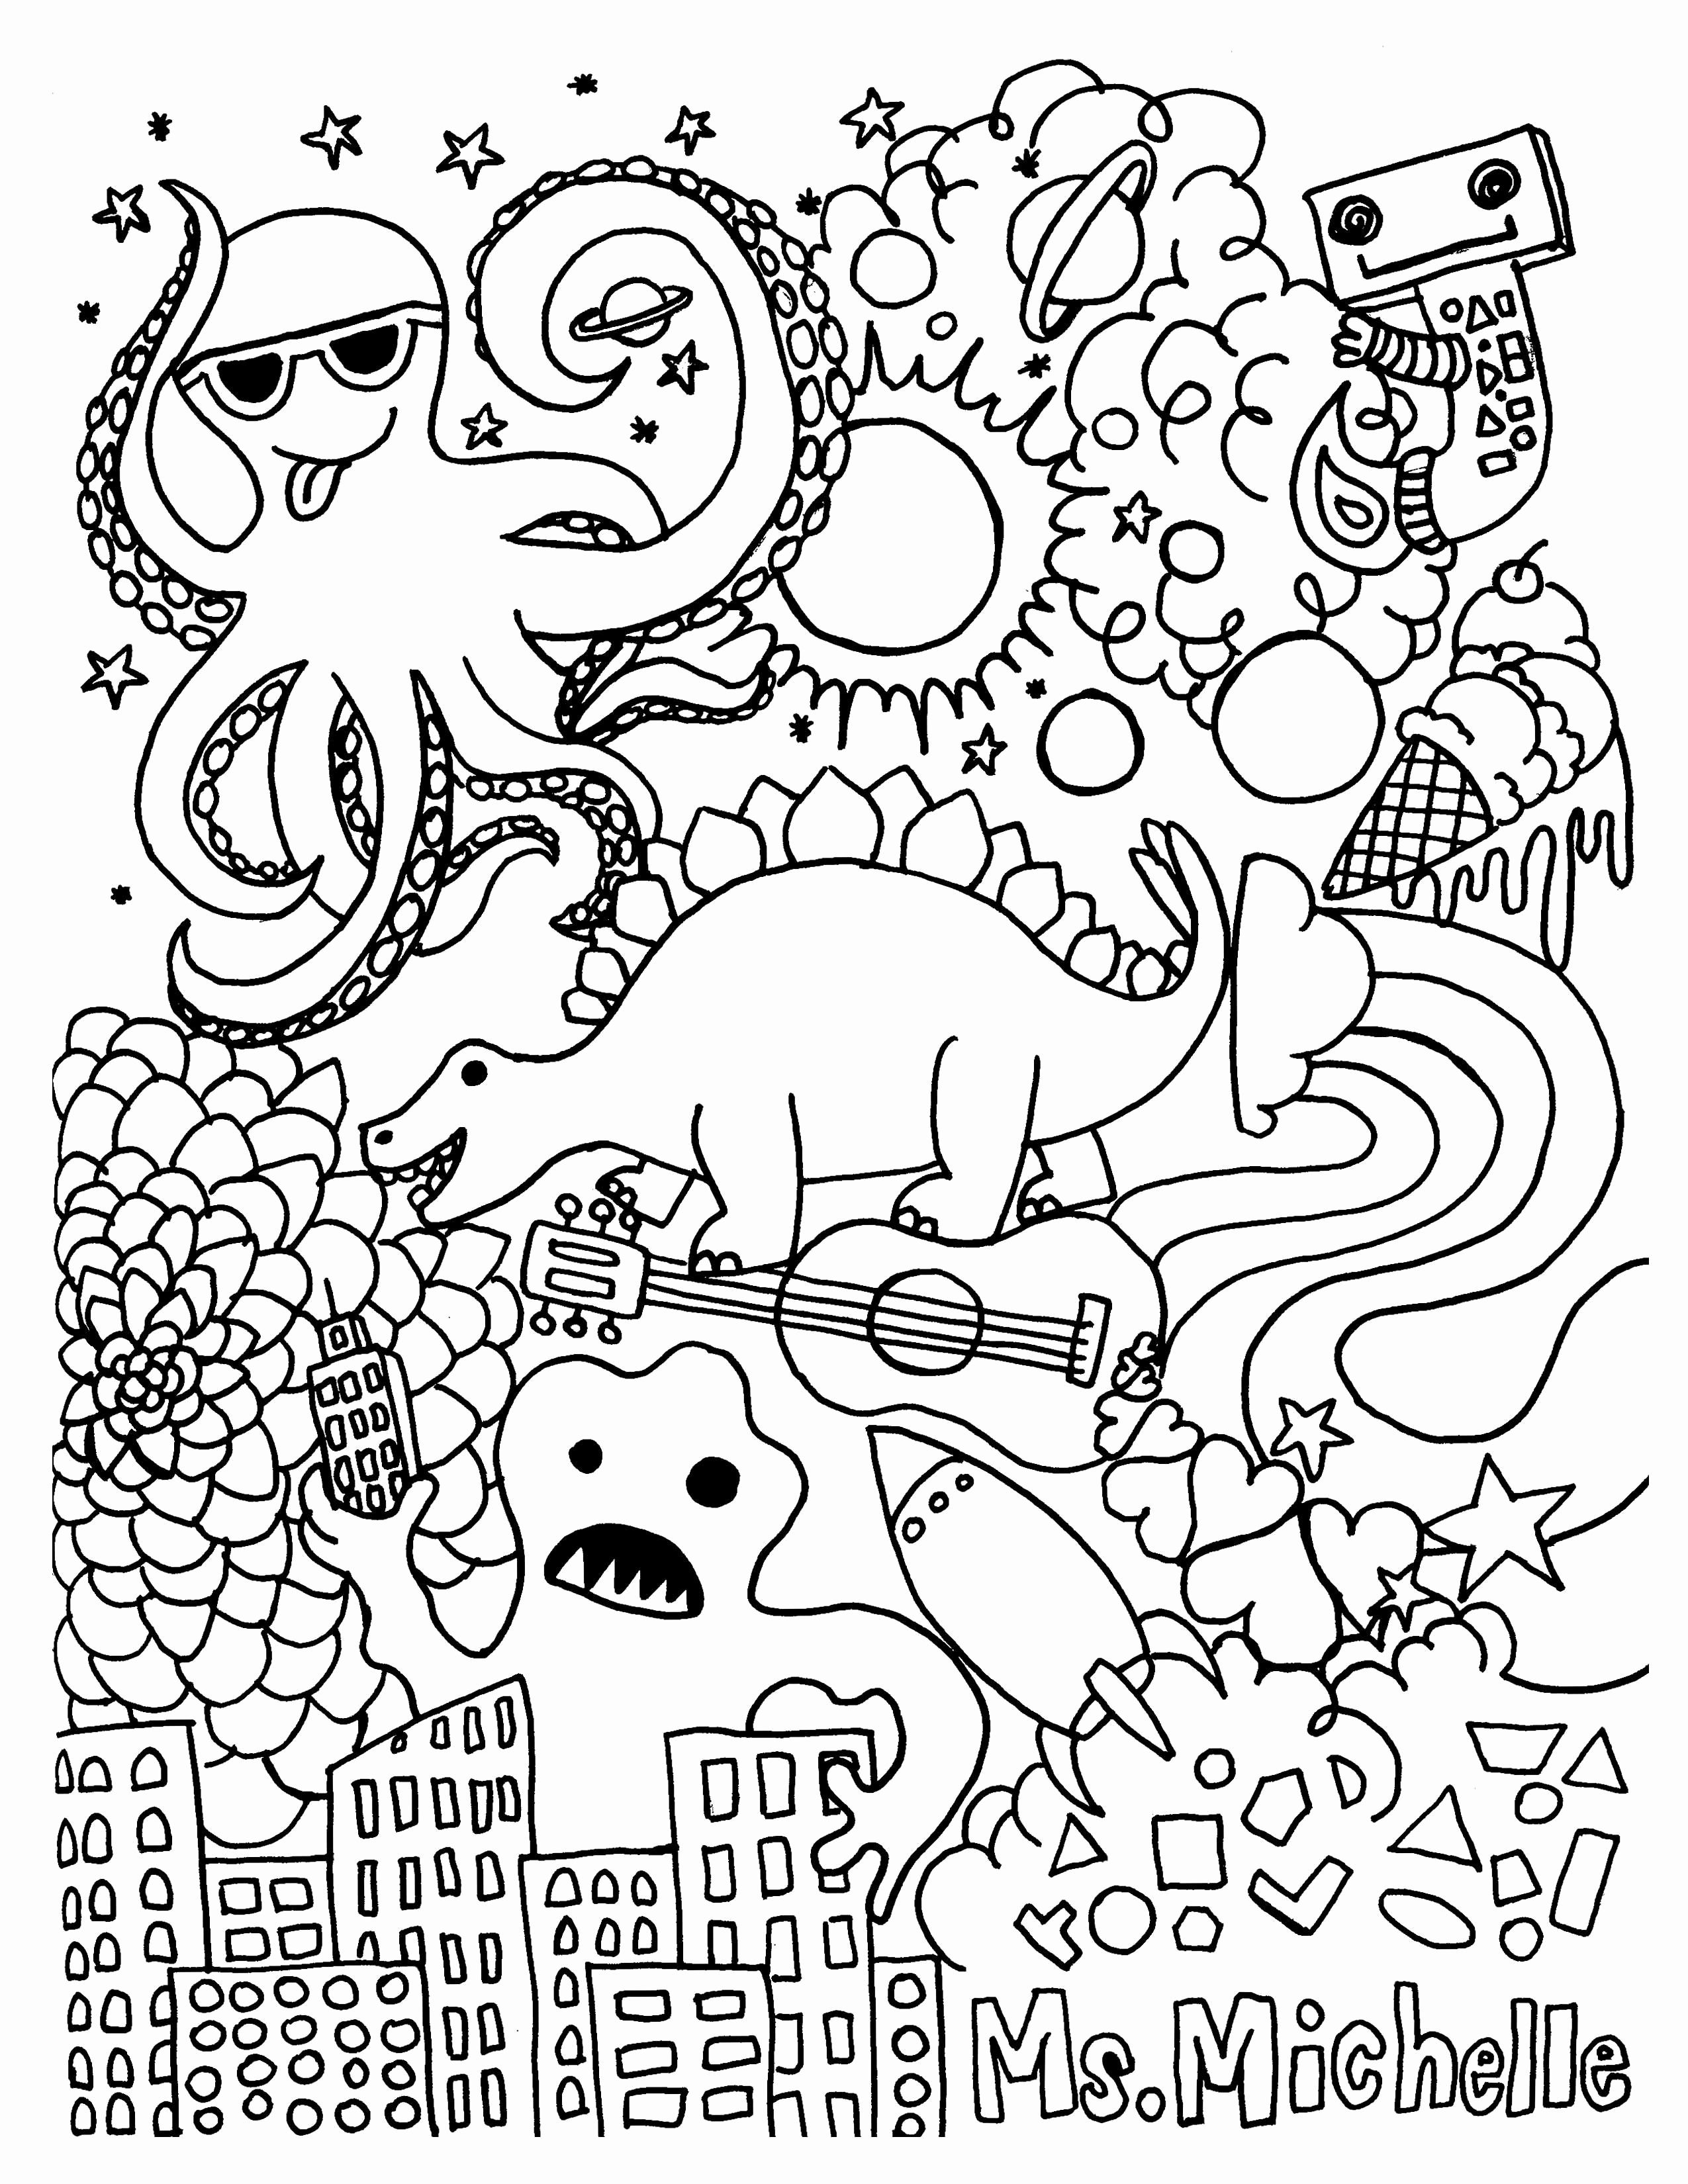 Halloween Decorations Coloring Pages At Getdrawings Com Free For